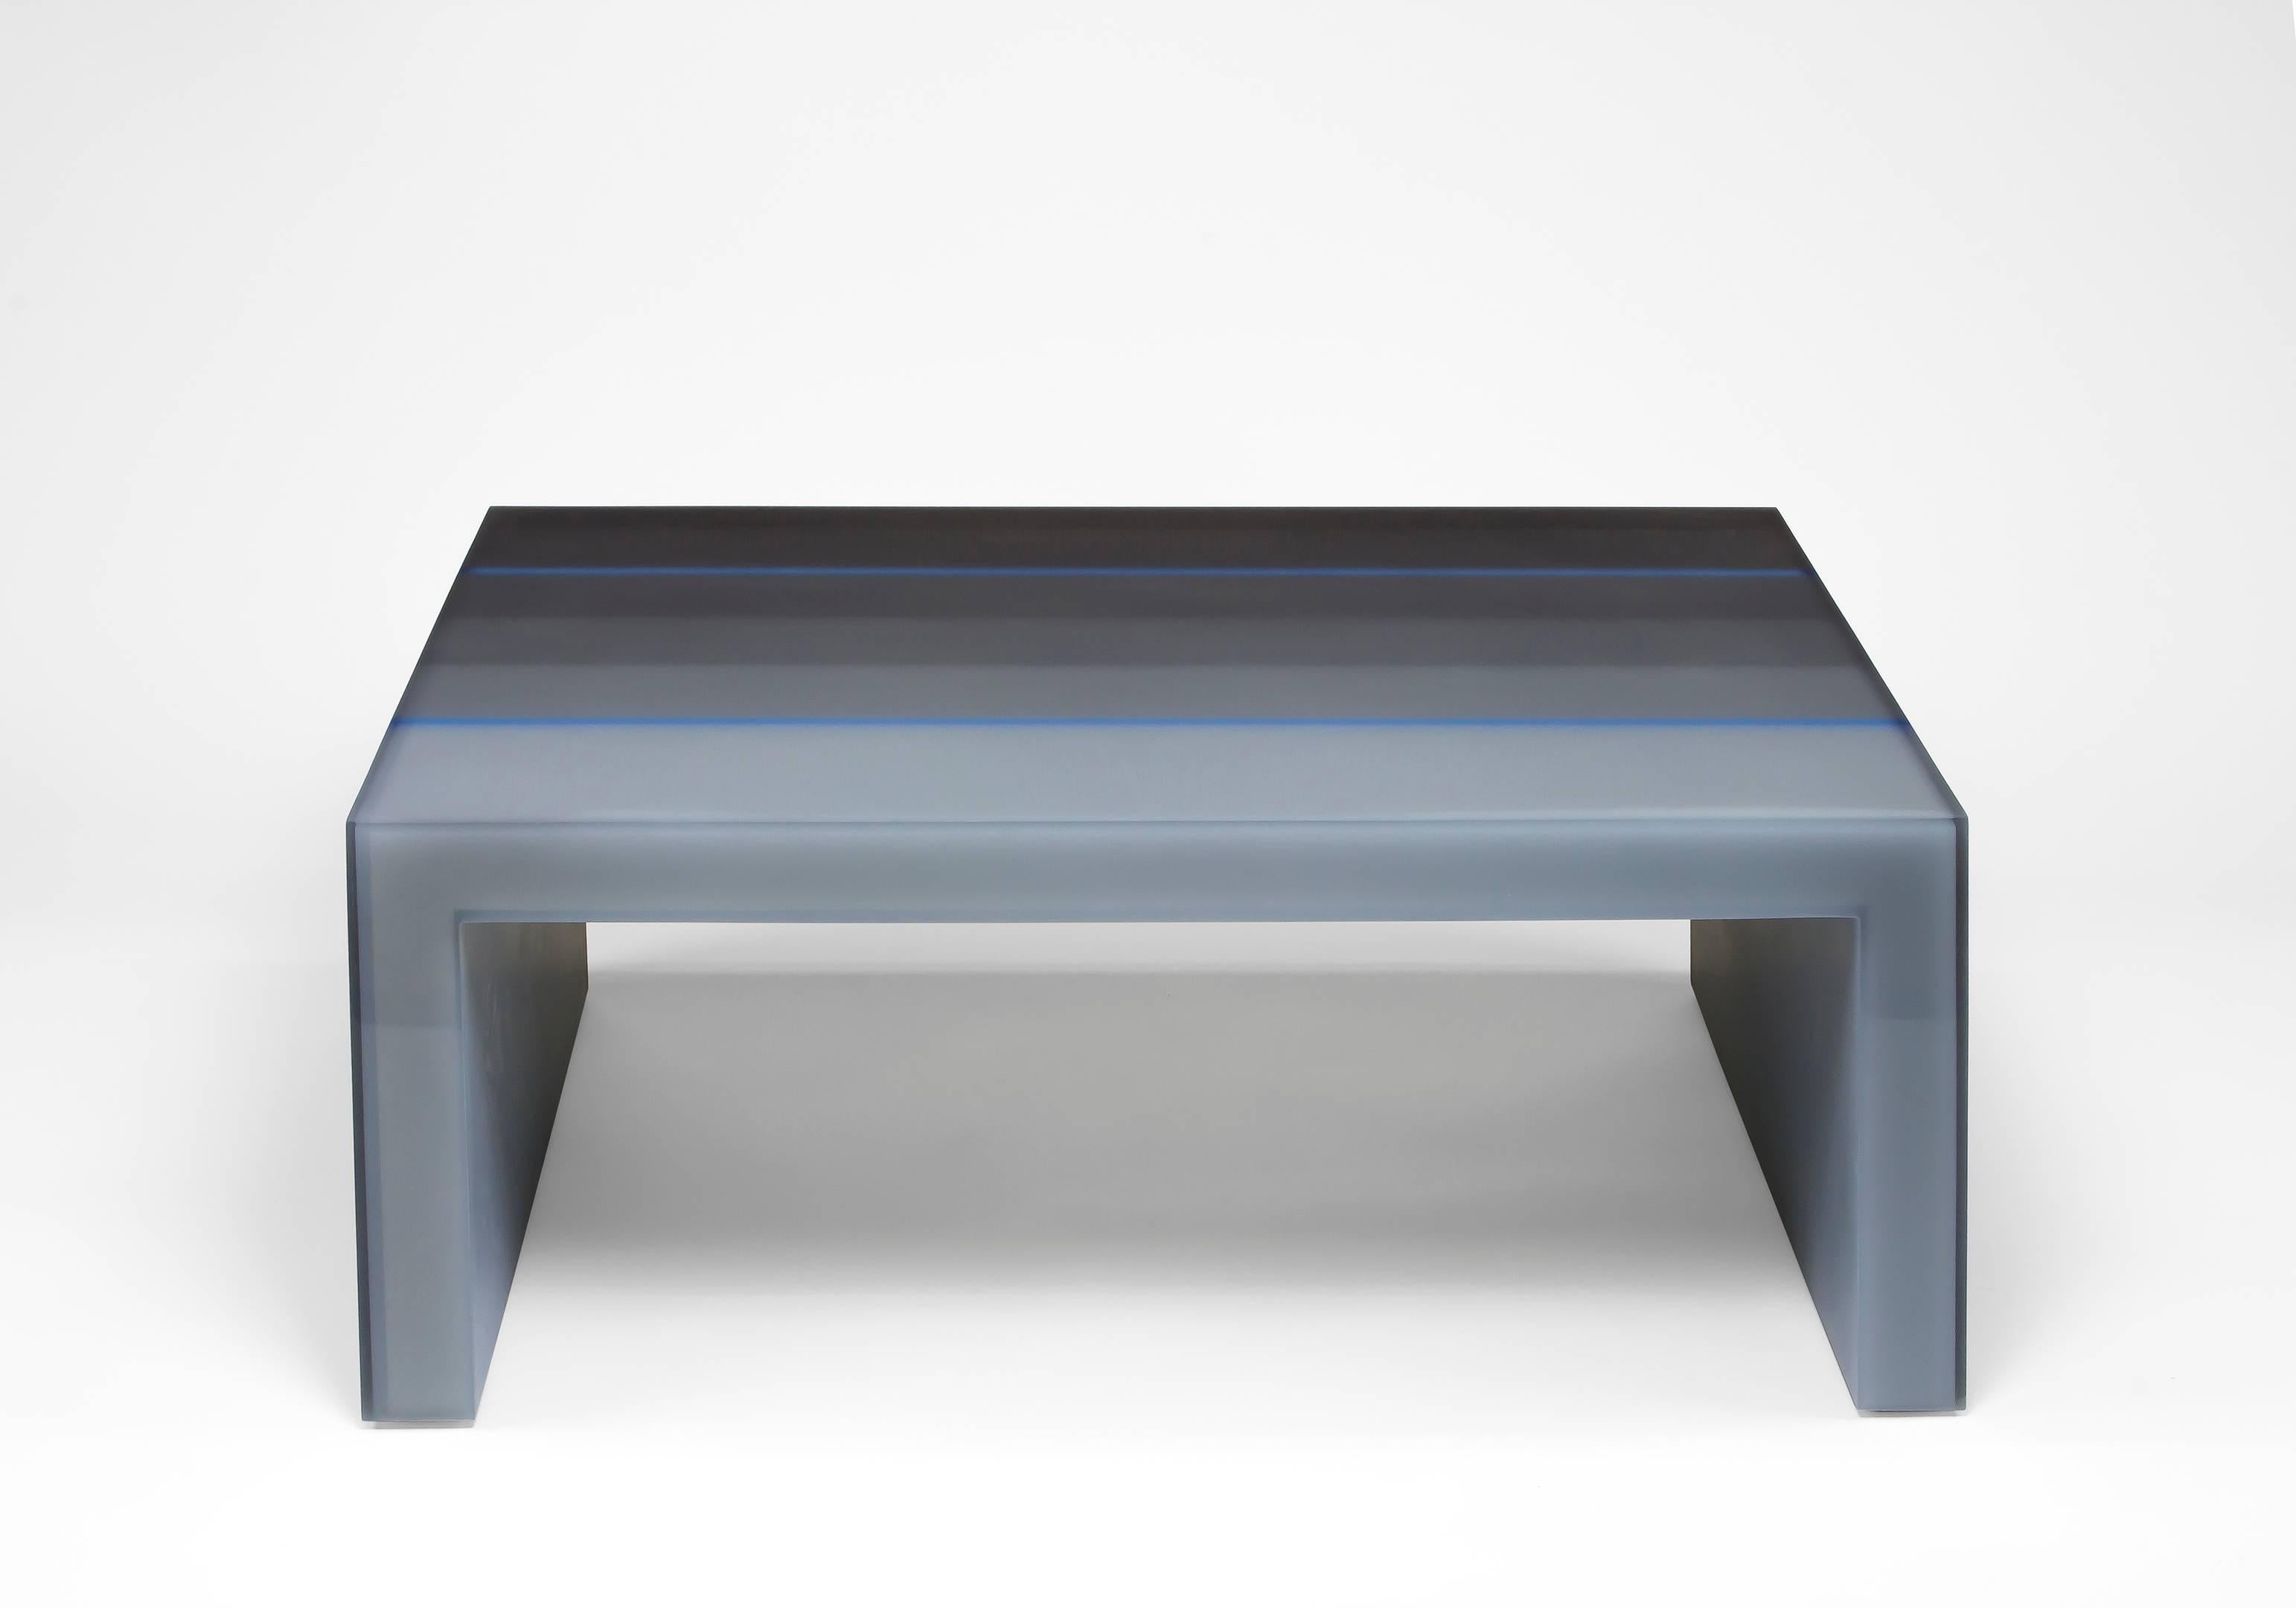 This coffee table uses Facture Studio's gradient style to transition in six layers from a deep opaque to water clear gray over a light gray resin core. Two water clear blue lines disrupt the gradient and contrast the their opacity. The interior and